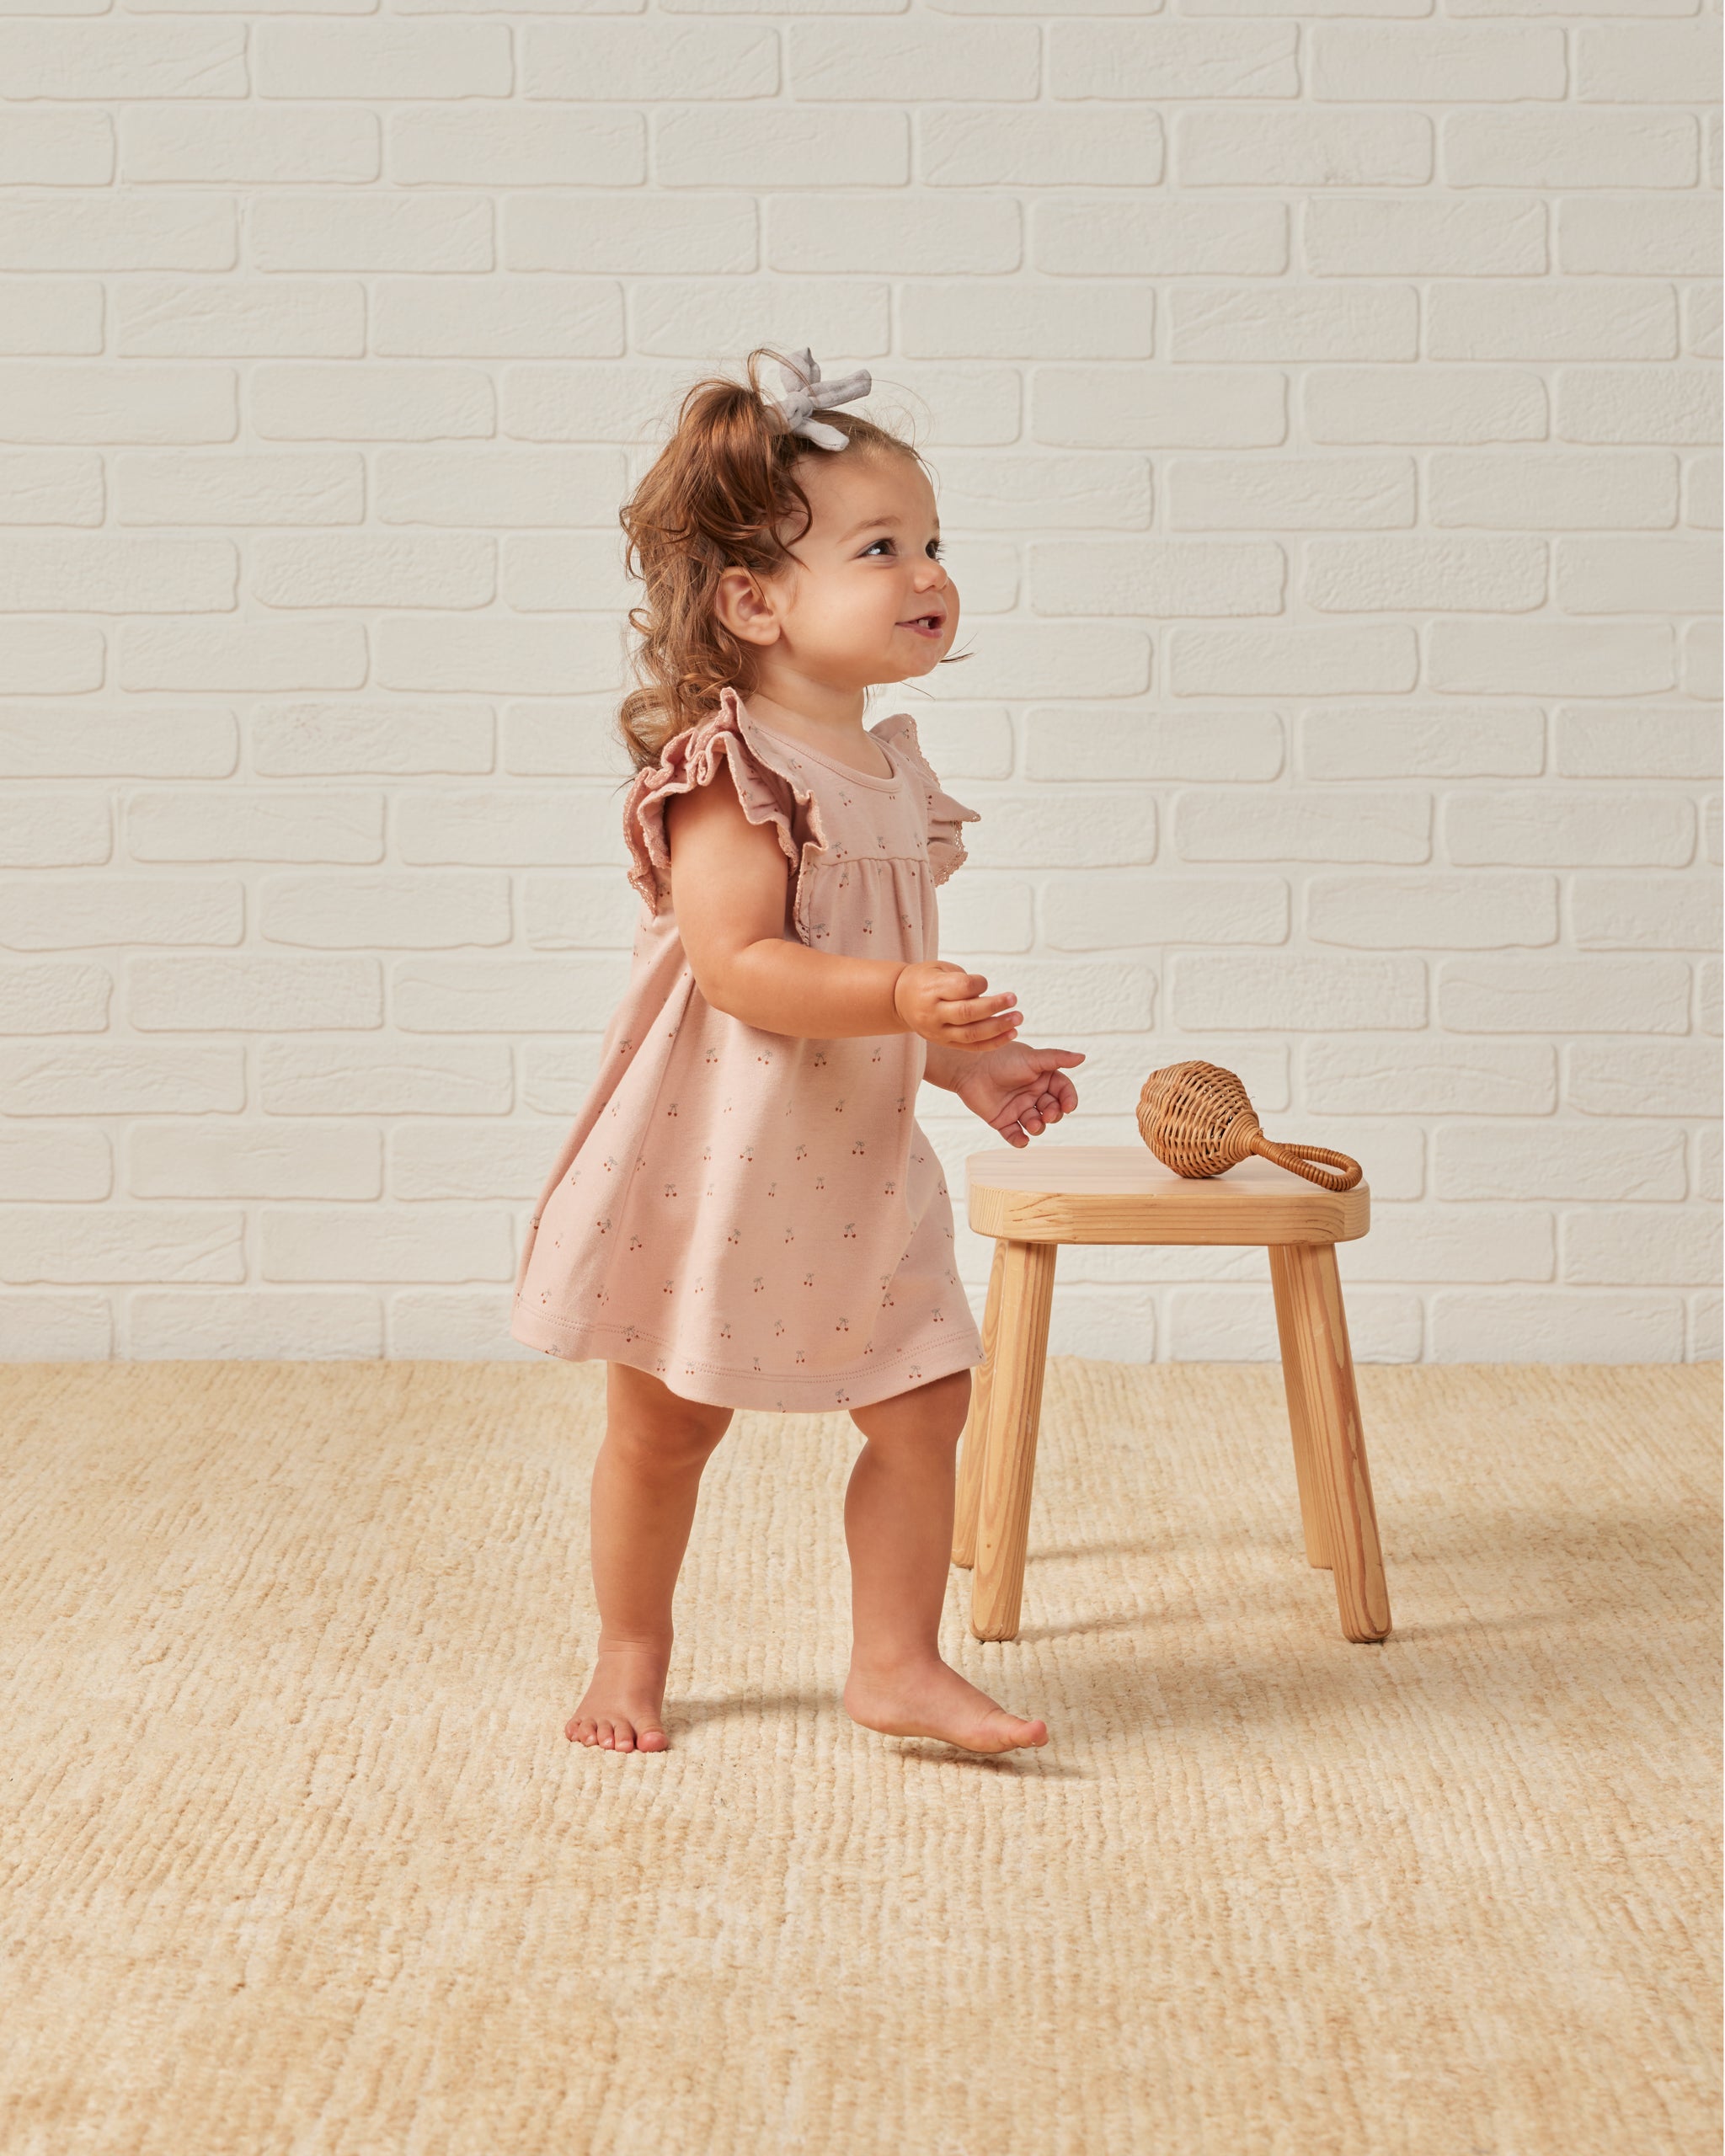 Flutter Dress || Cherries - Rylee + Cru | Kids Clothes | Trendy Baby Clothes | Modern Infant Outfits |